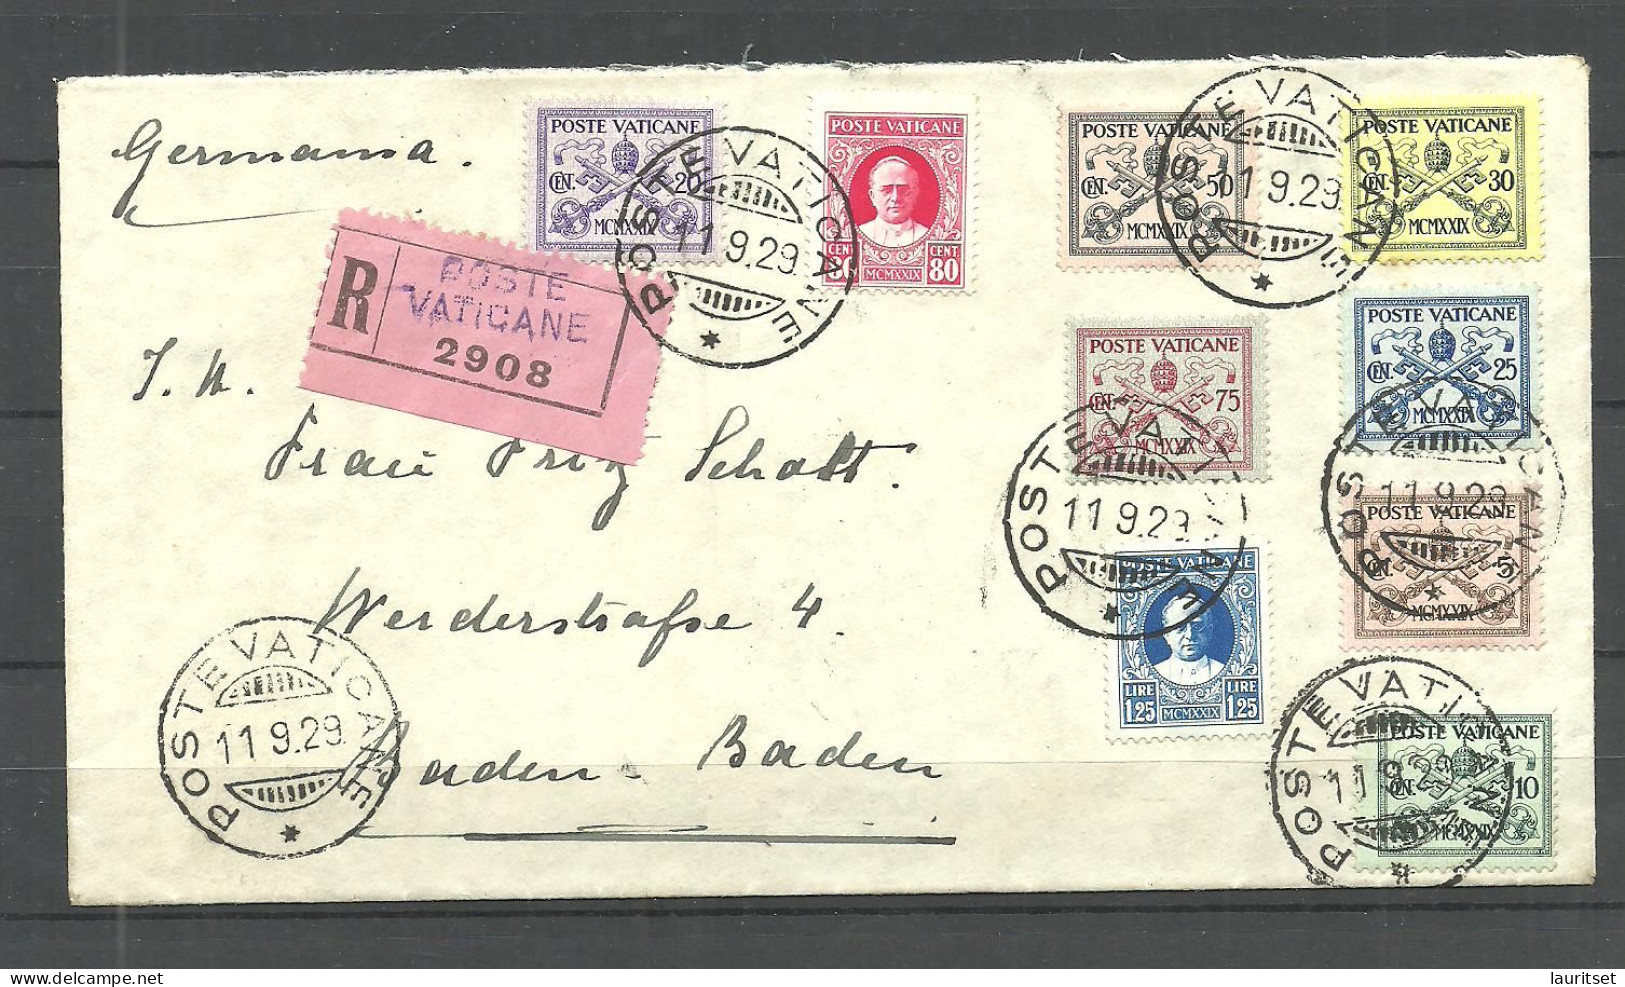 VATICAN Vatikan Poste Varticane 1929 Air Mail Cover Posta Aerea Air Mail Flugpost To Germany Baden Baden - Covers & Documents